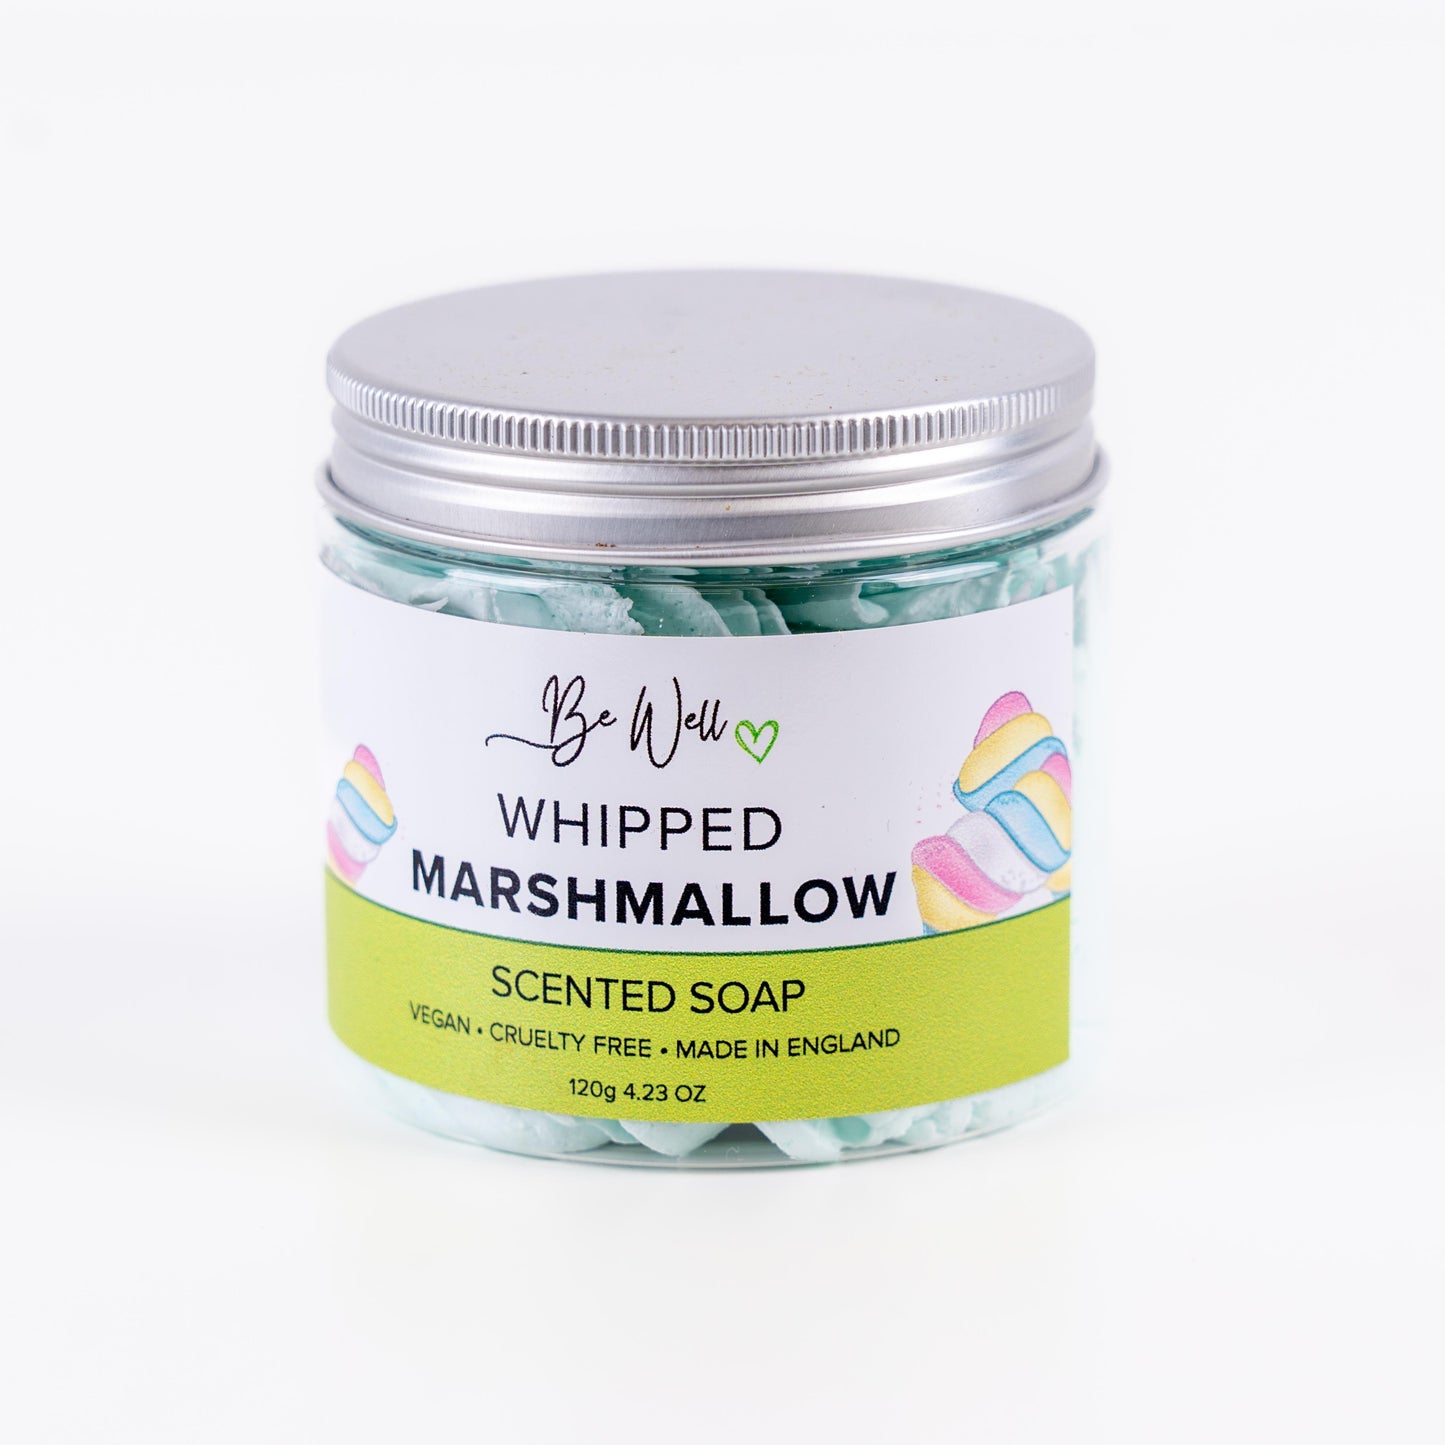 Marshmallow Scented Whipped Soap: Natural, Vegan, Cruelty-Free